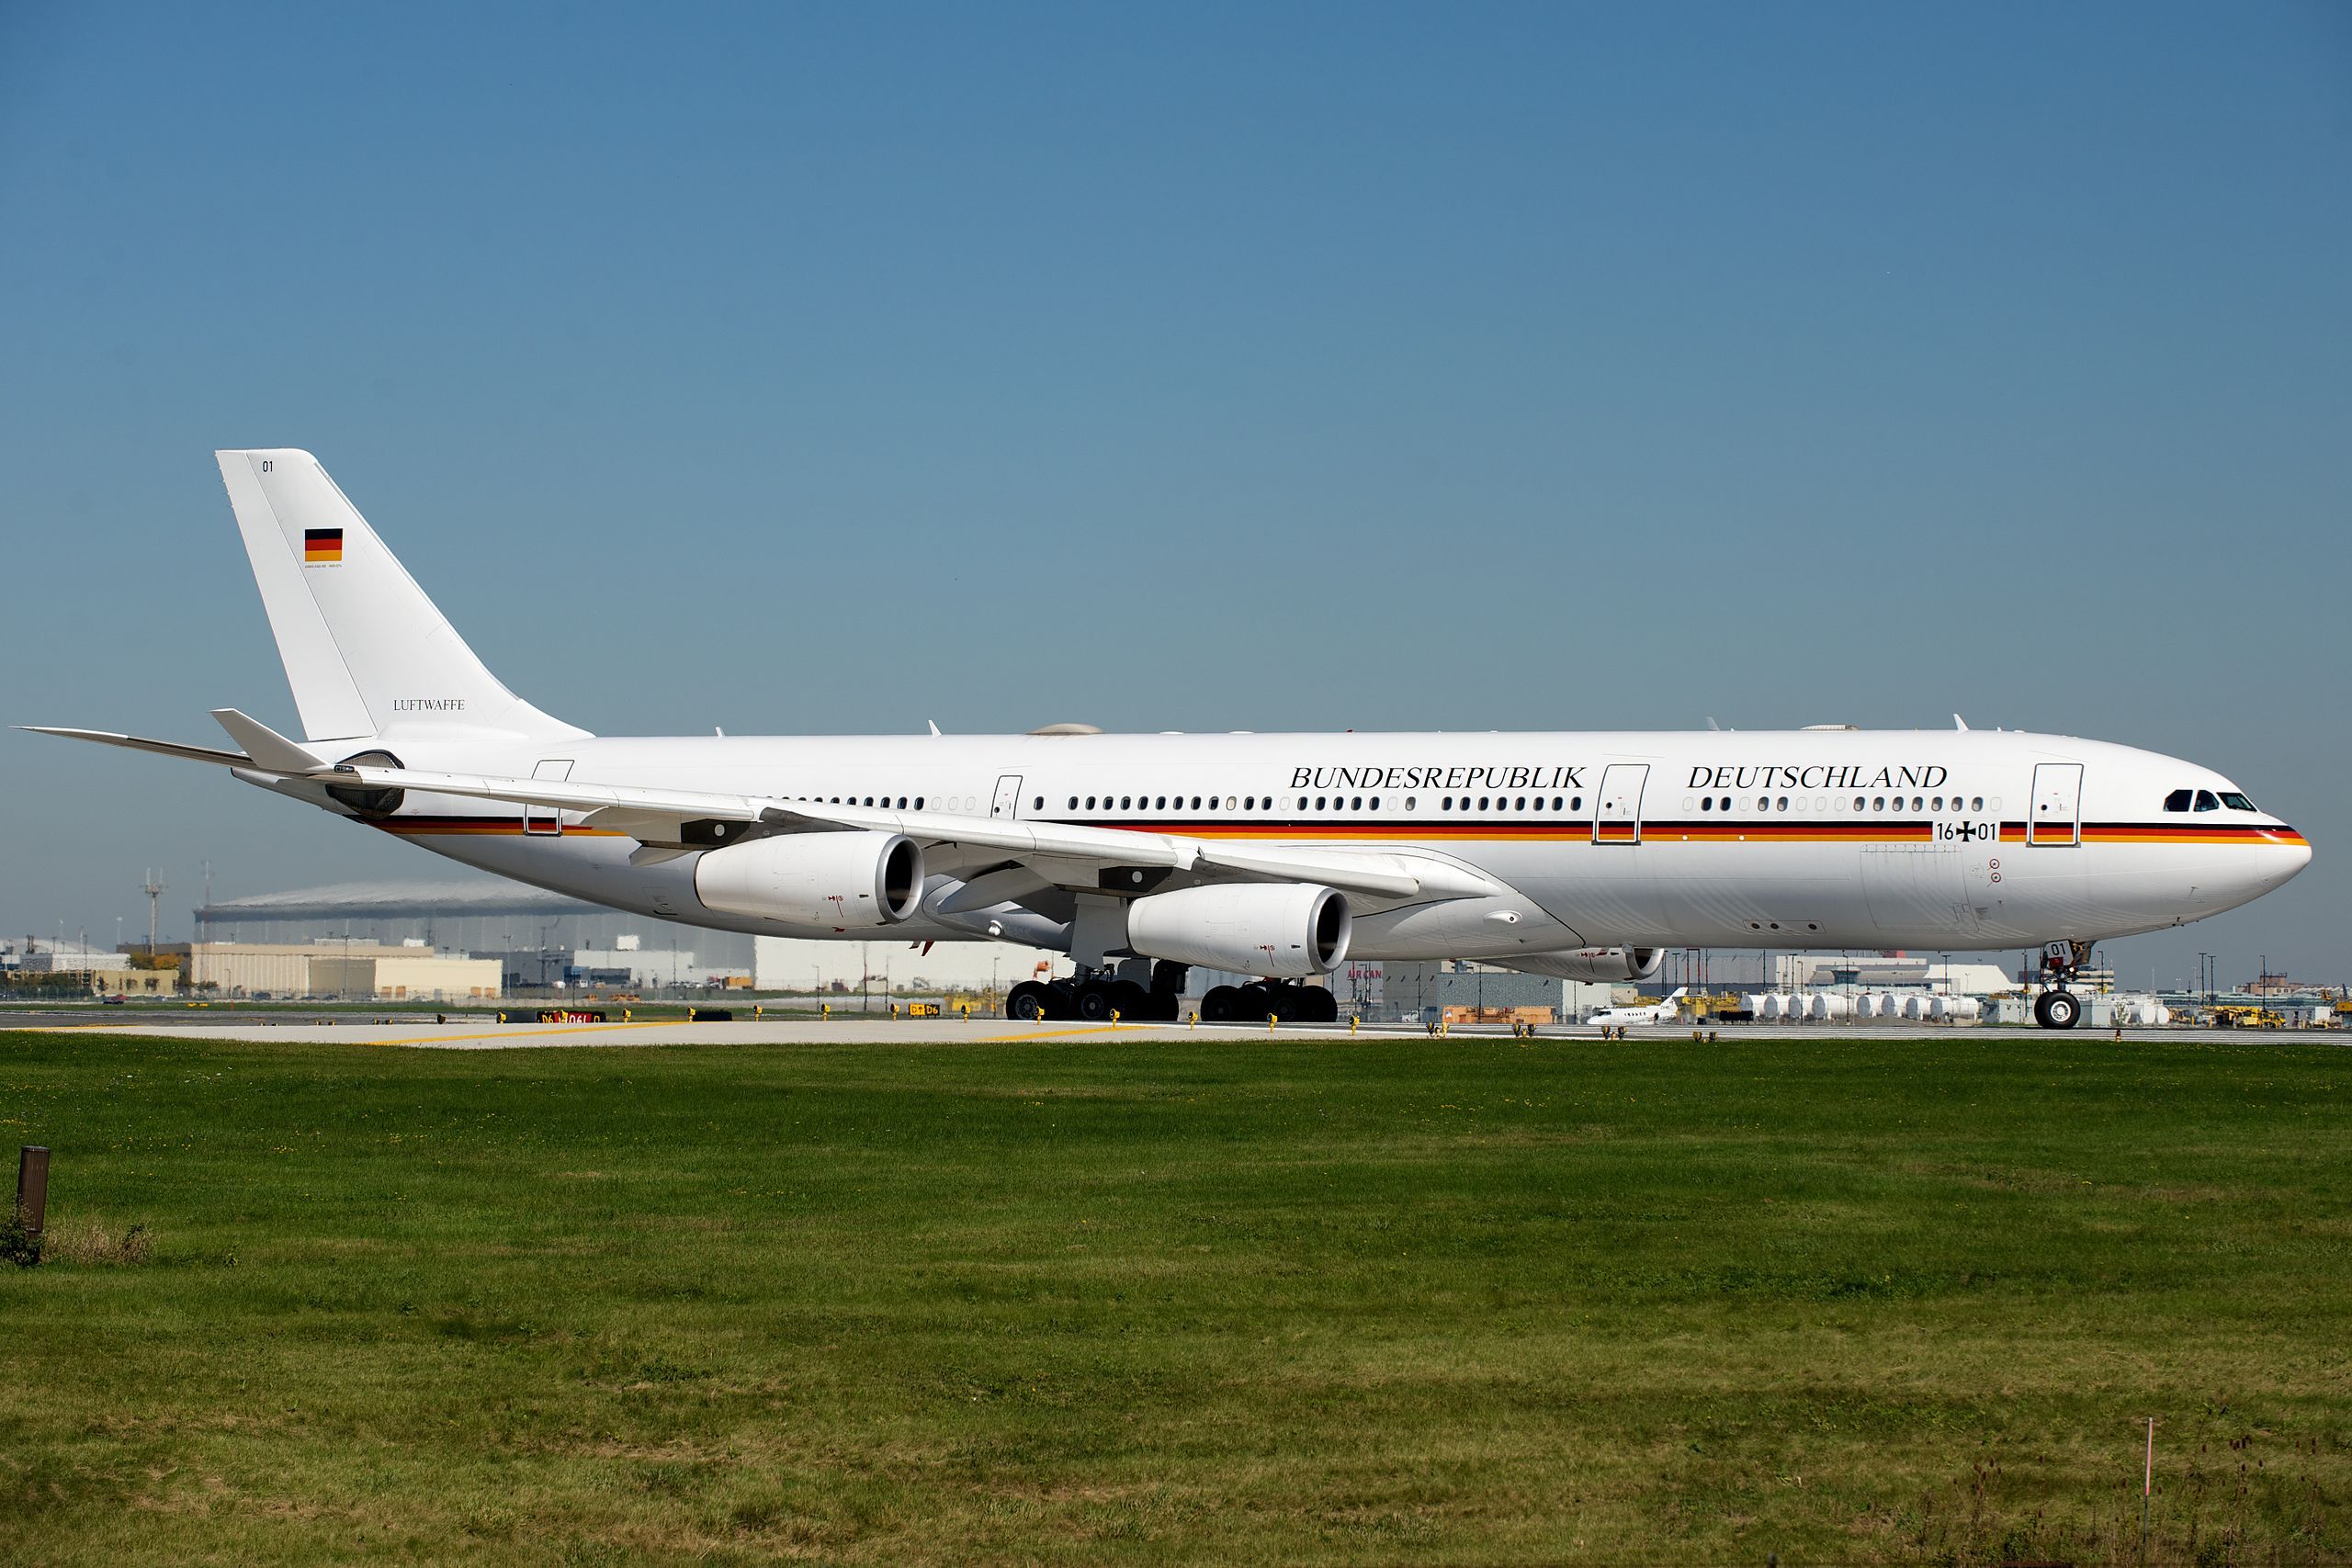 The German Air Force Airbus A340-300. 